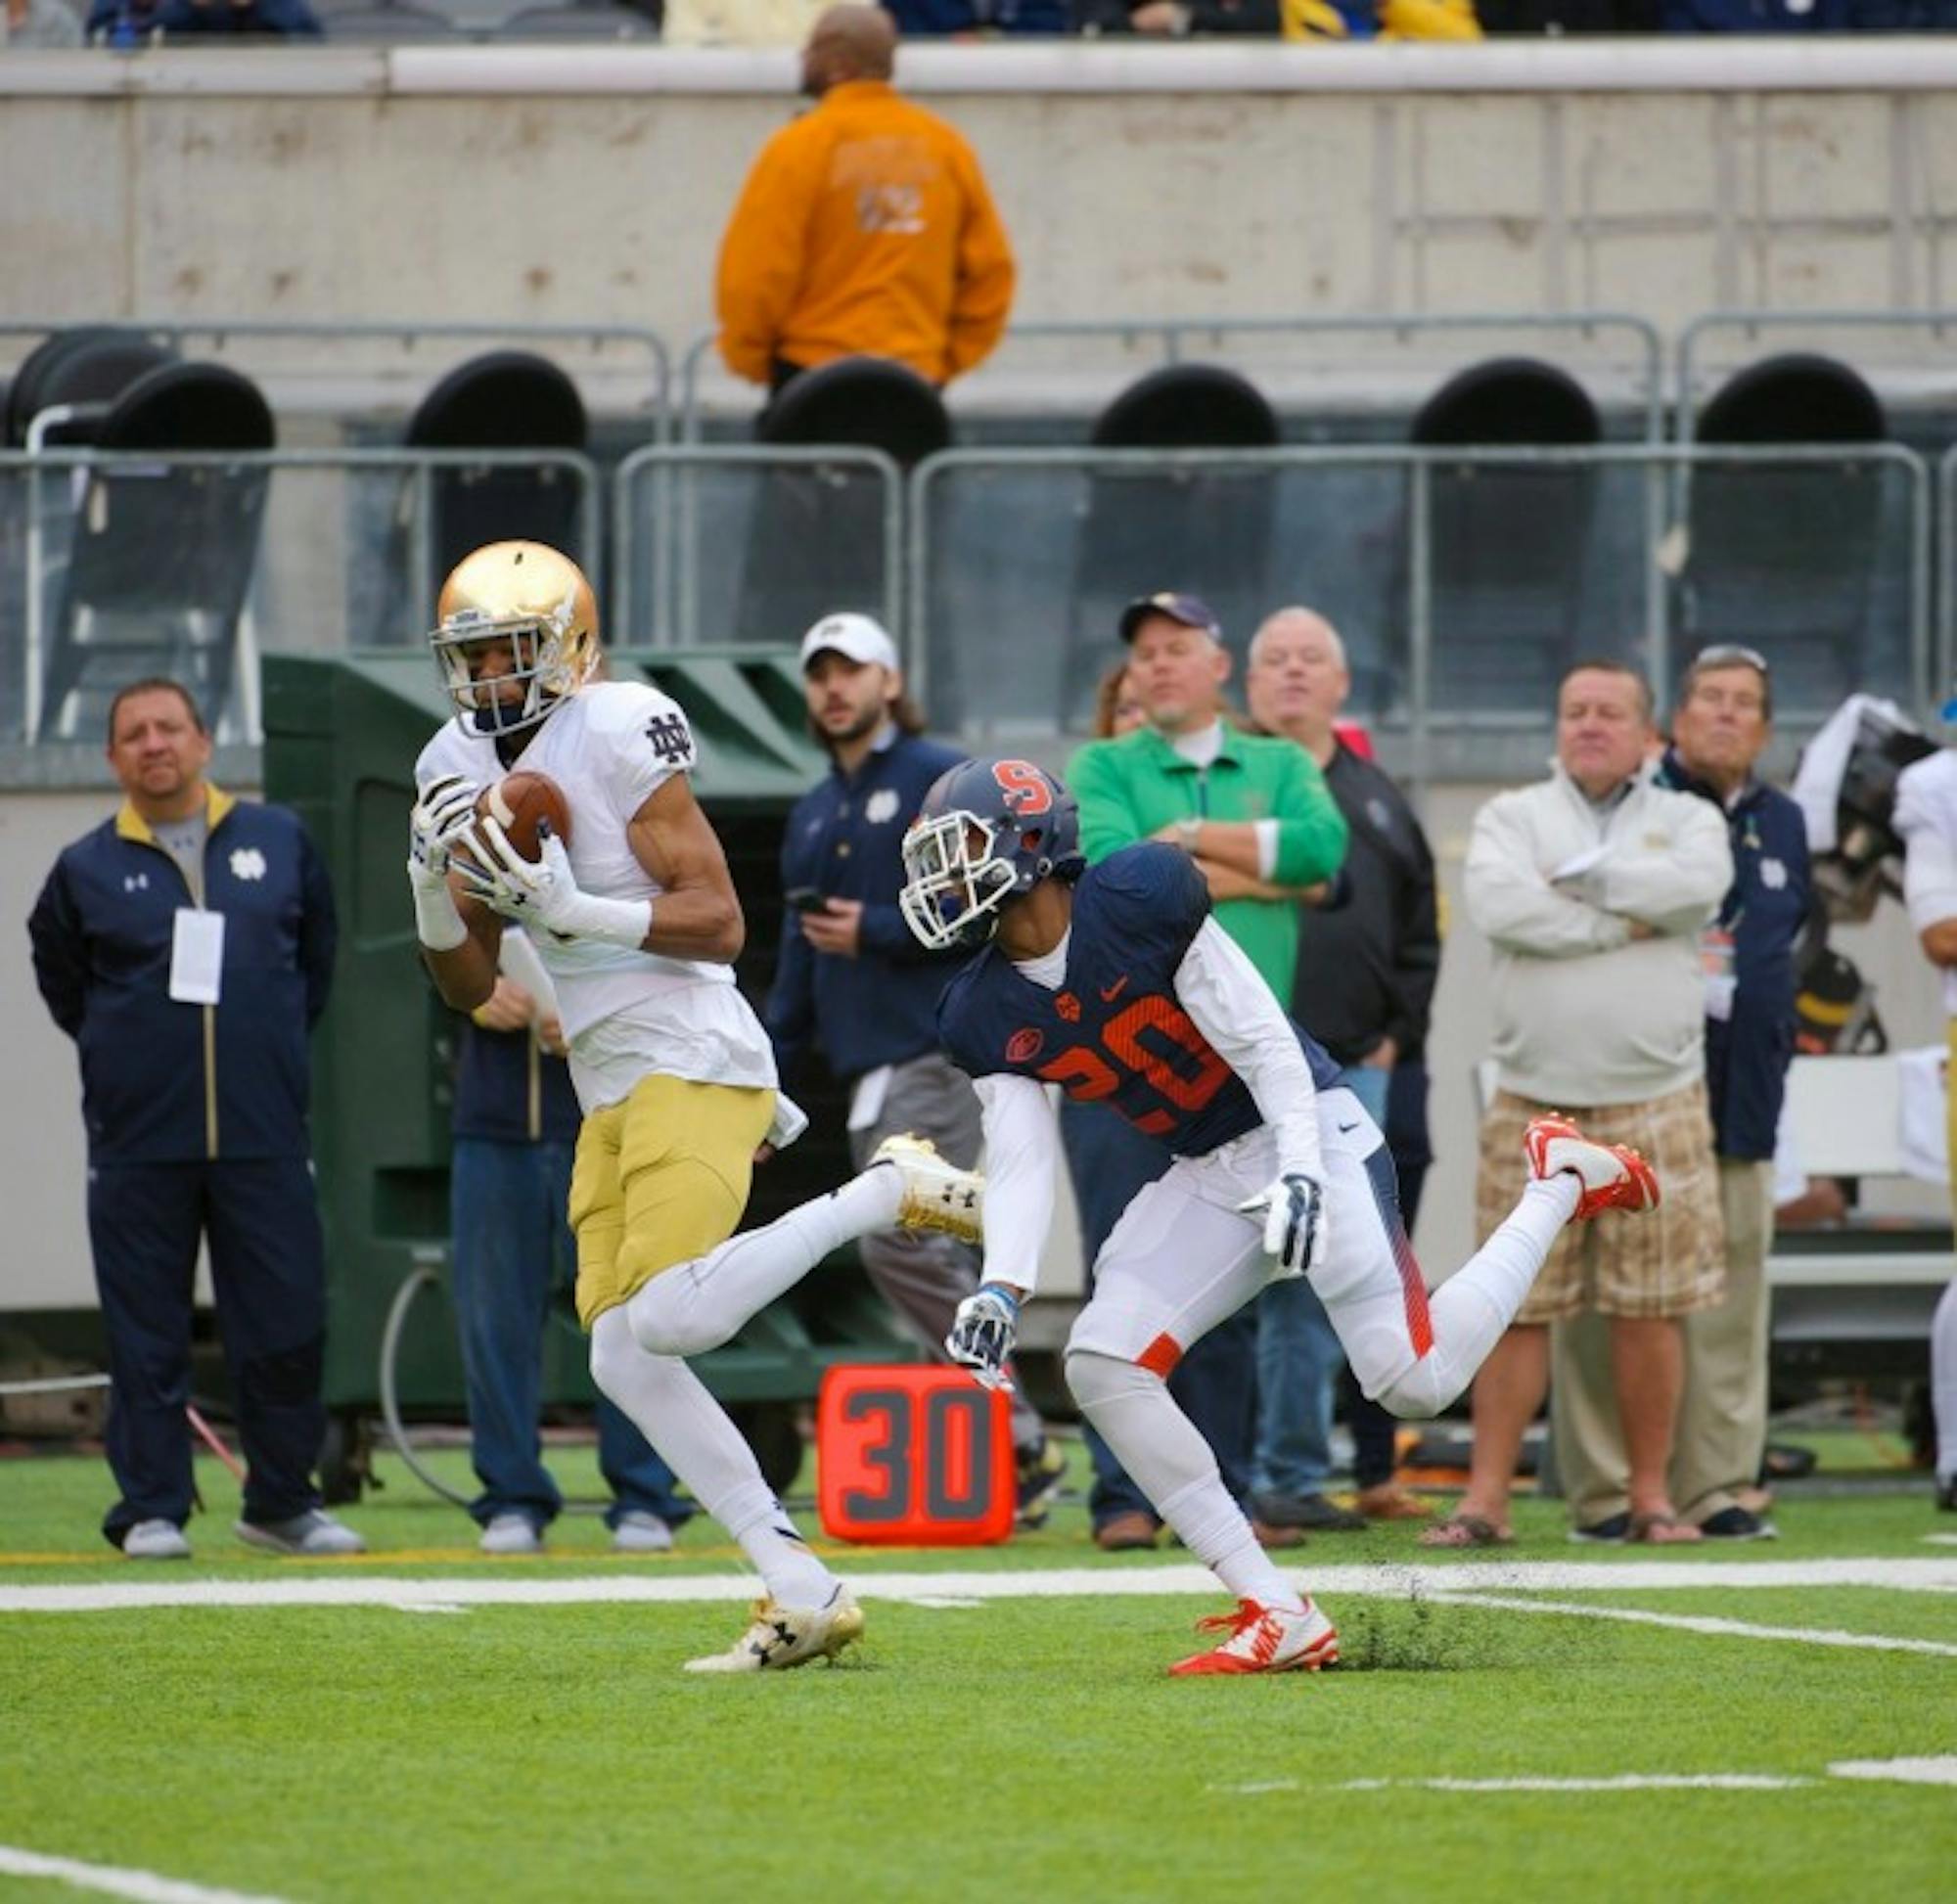 Irish sophomore receiver Equanimeous St. Brown hauls in a pass down the field during Notre Dame's 50-33 win over Syracuse on Saturday at MetLife Stadium.